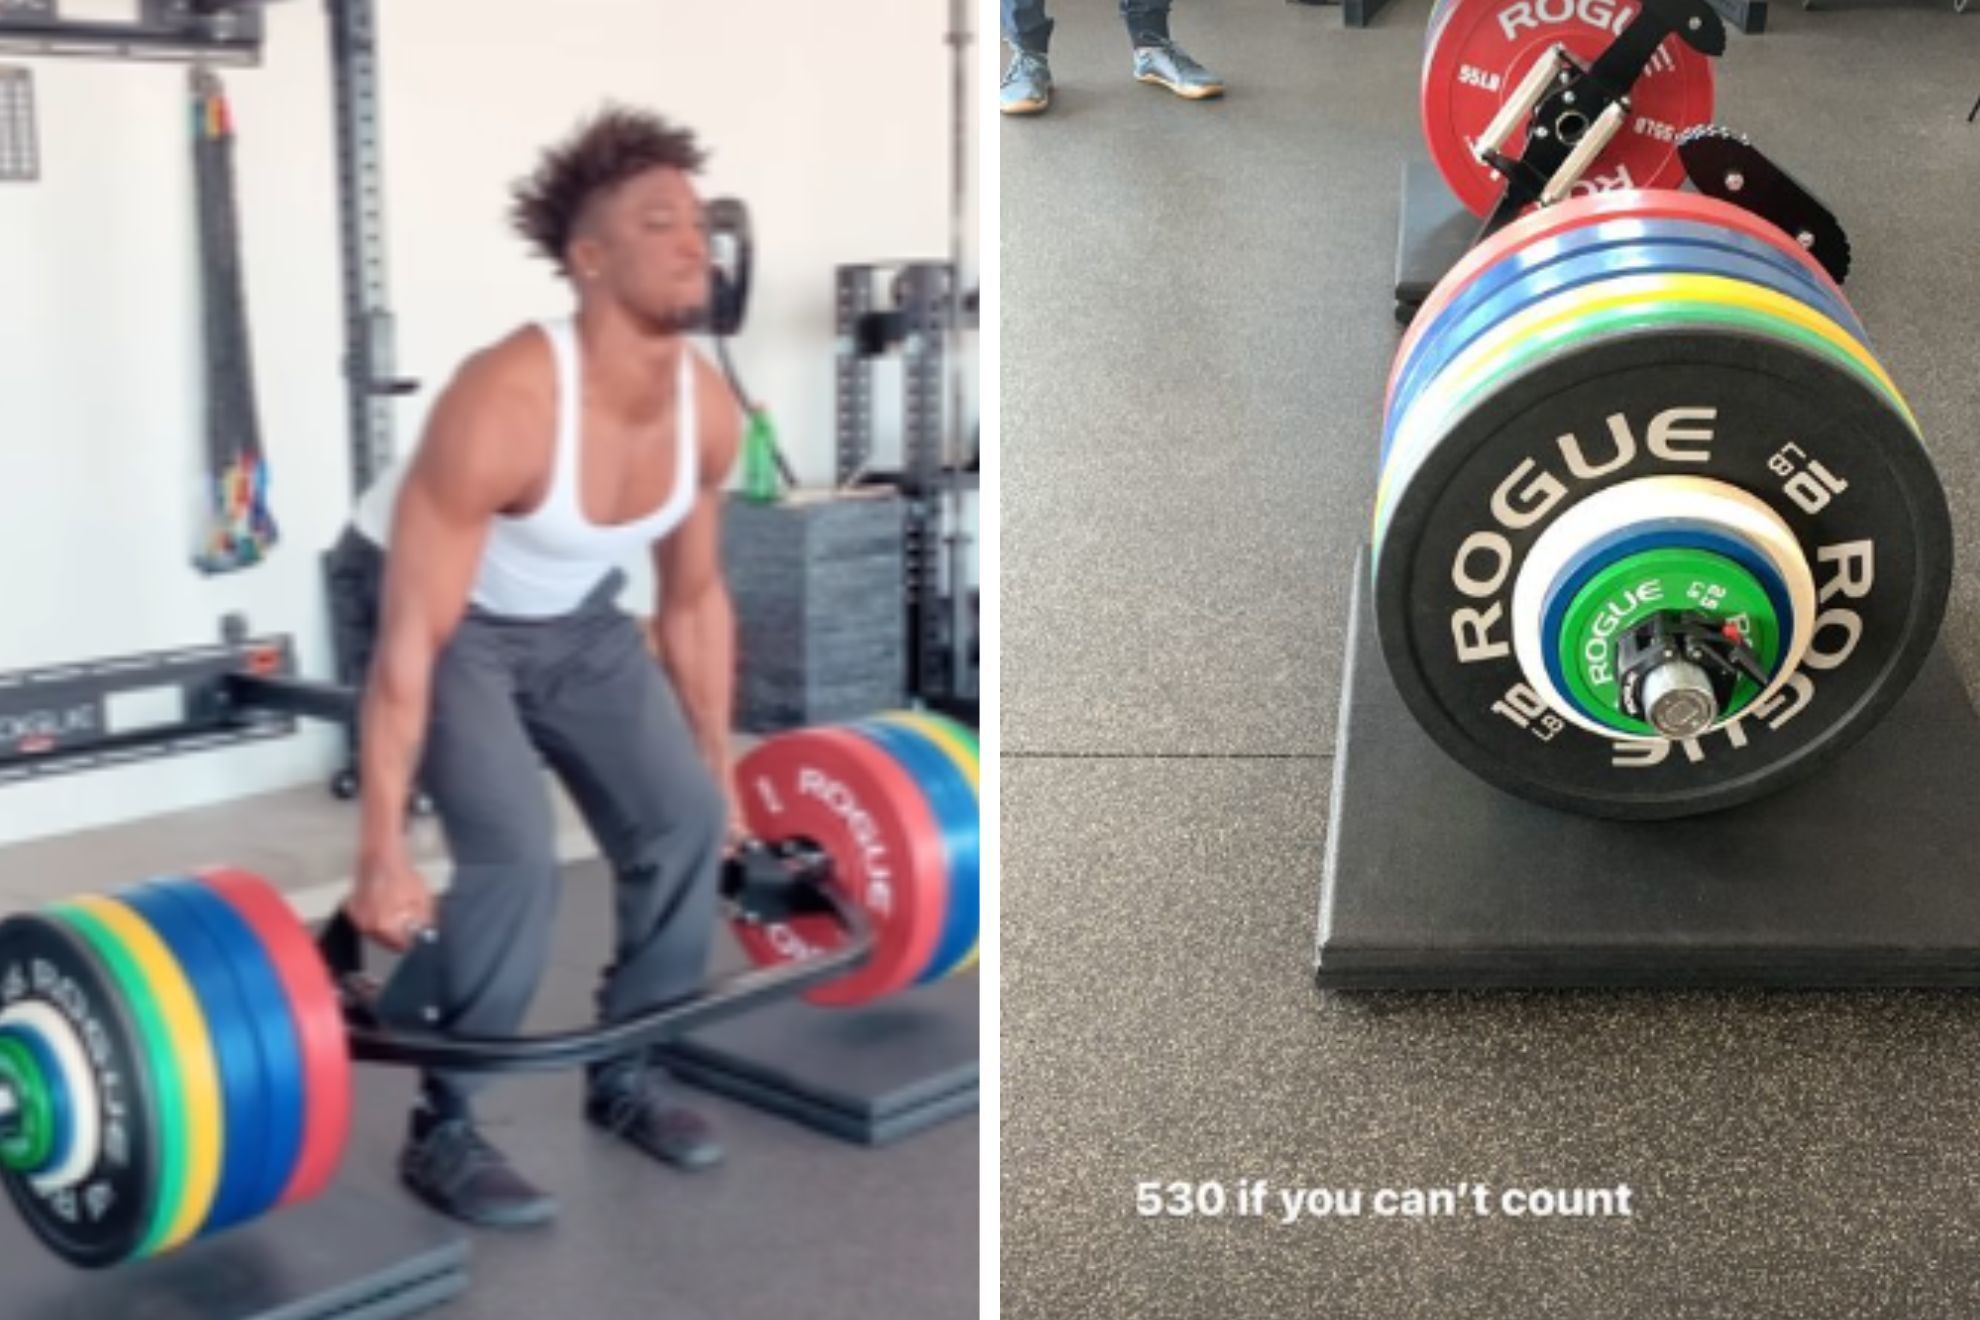 Saints WR Michael Thomas surprised by 'Feds' after deadlifting 530 pounds